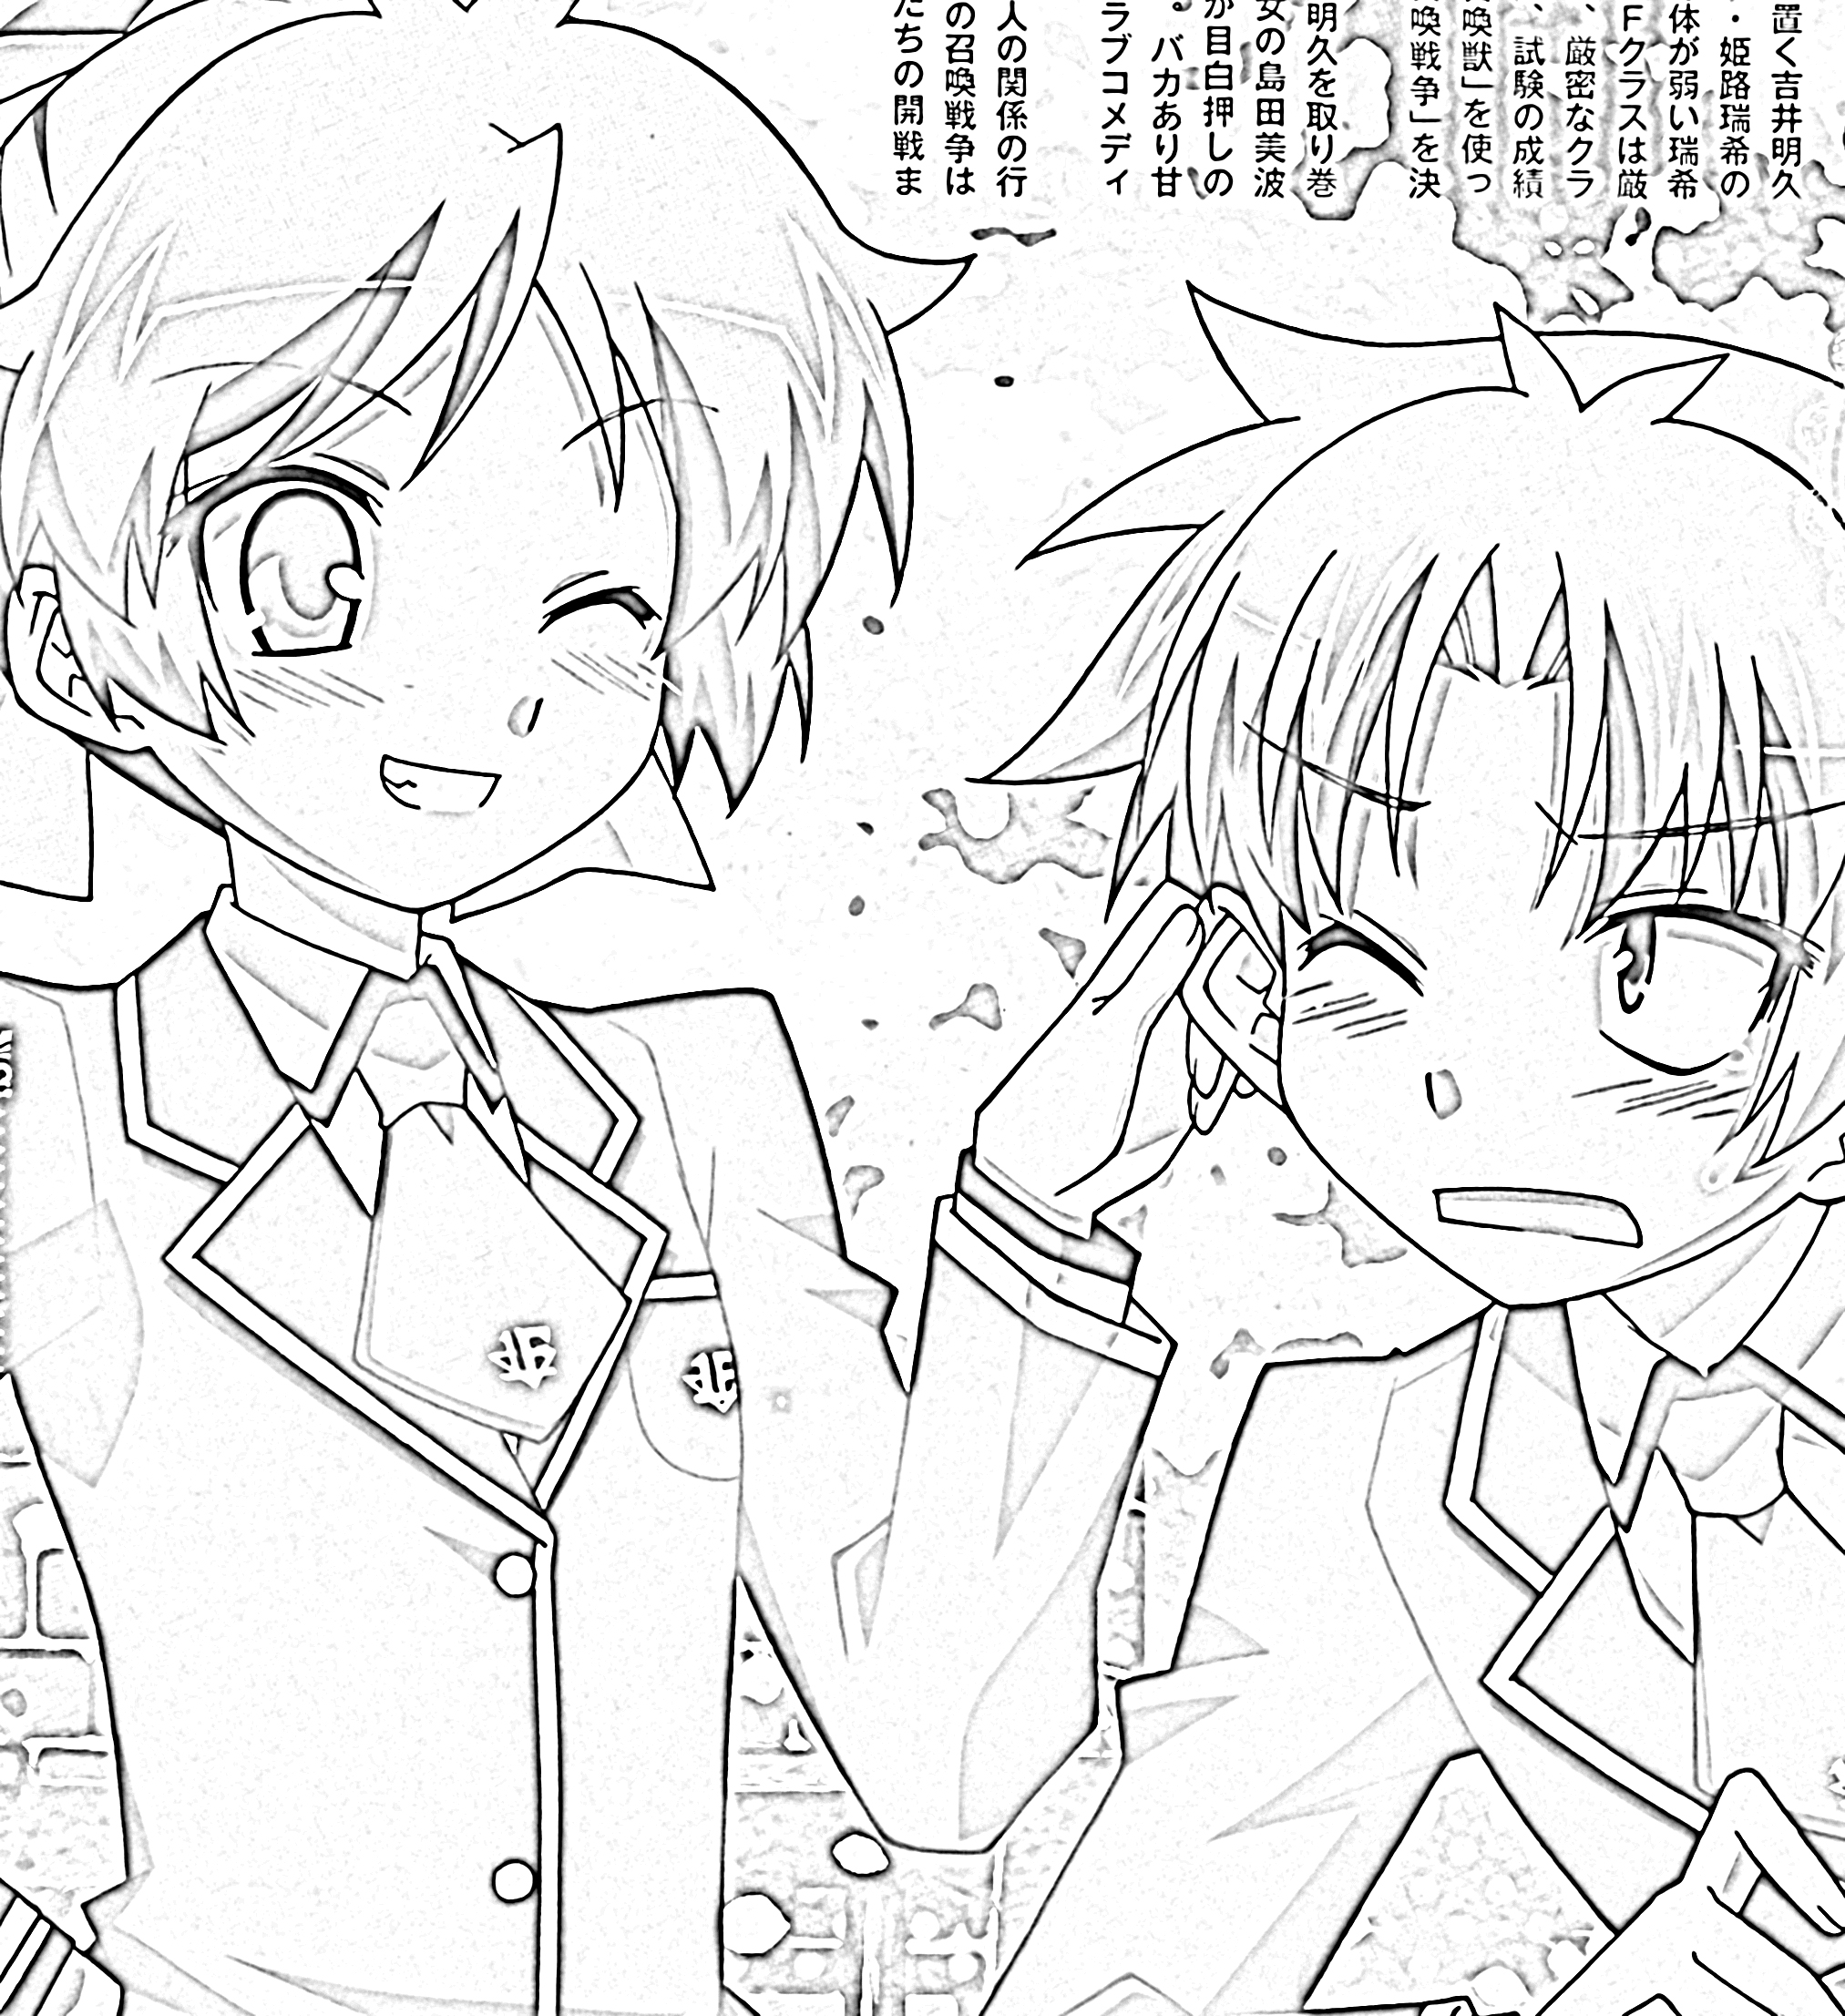 Baka and Test Coloring Pages 1